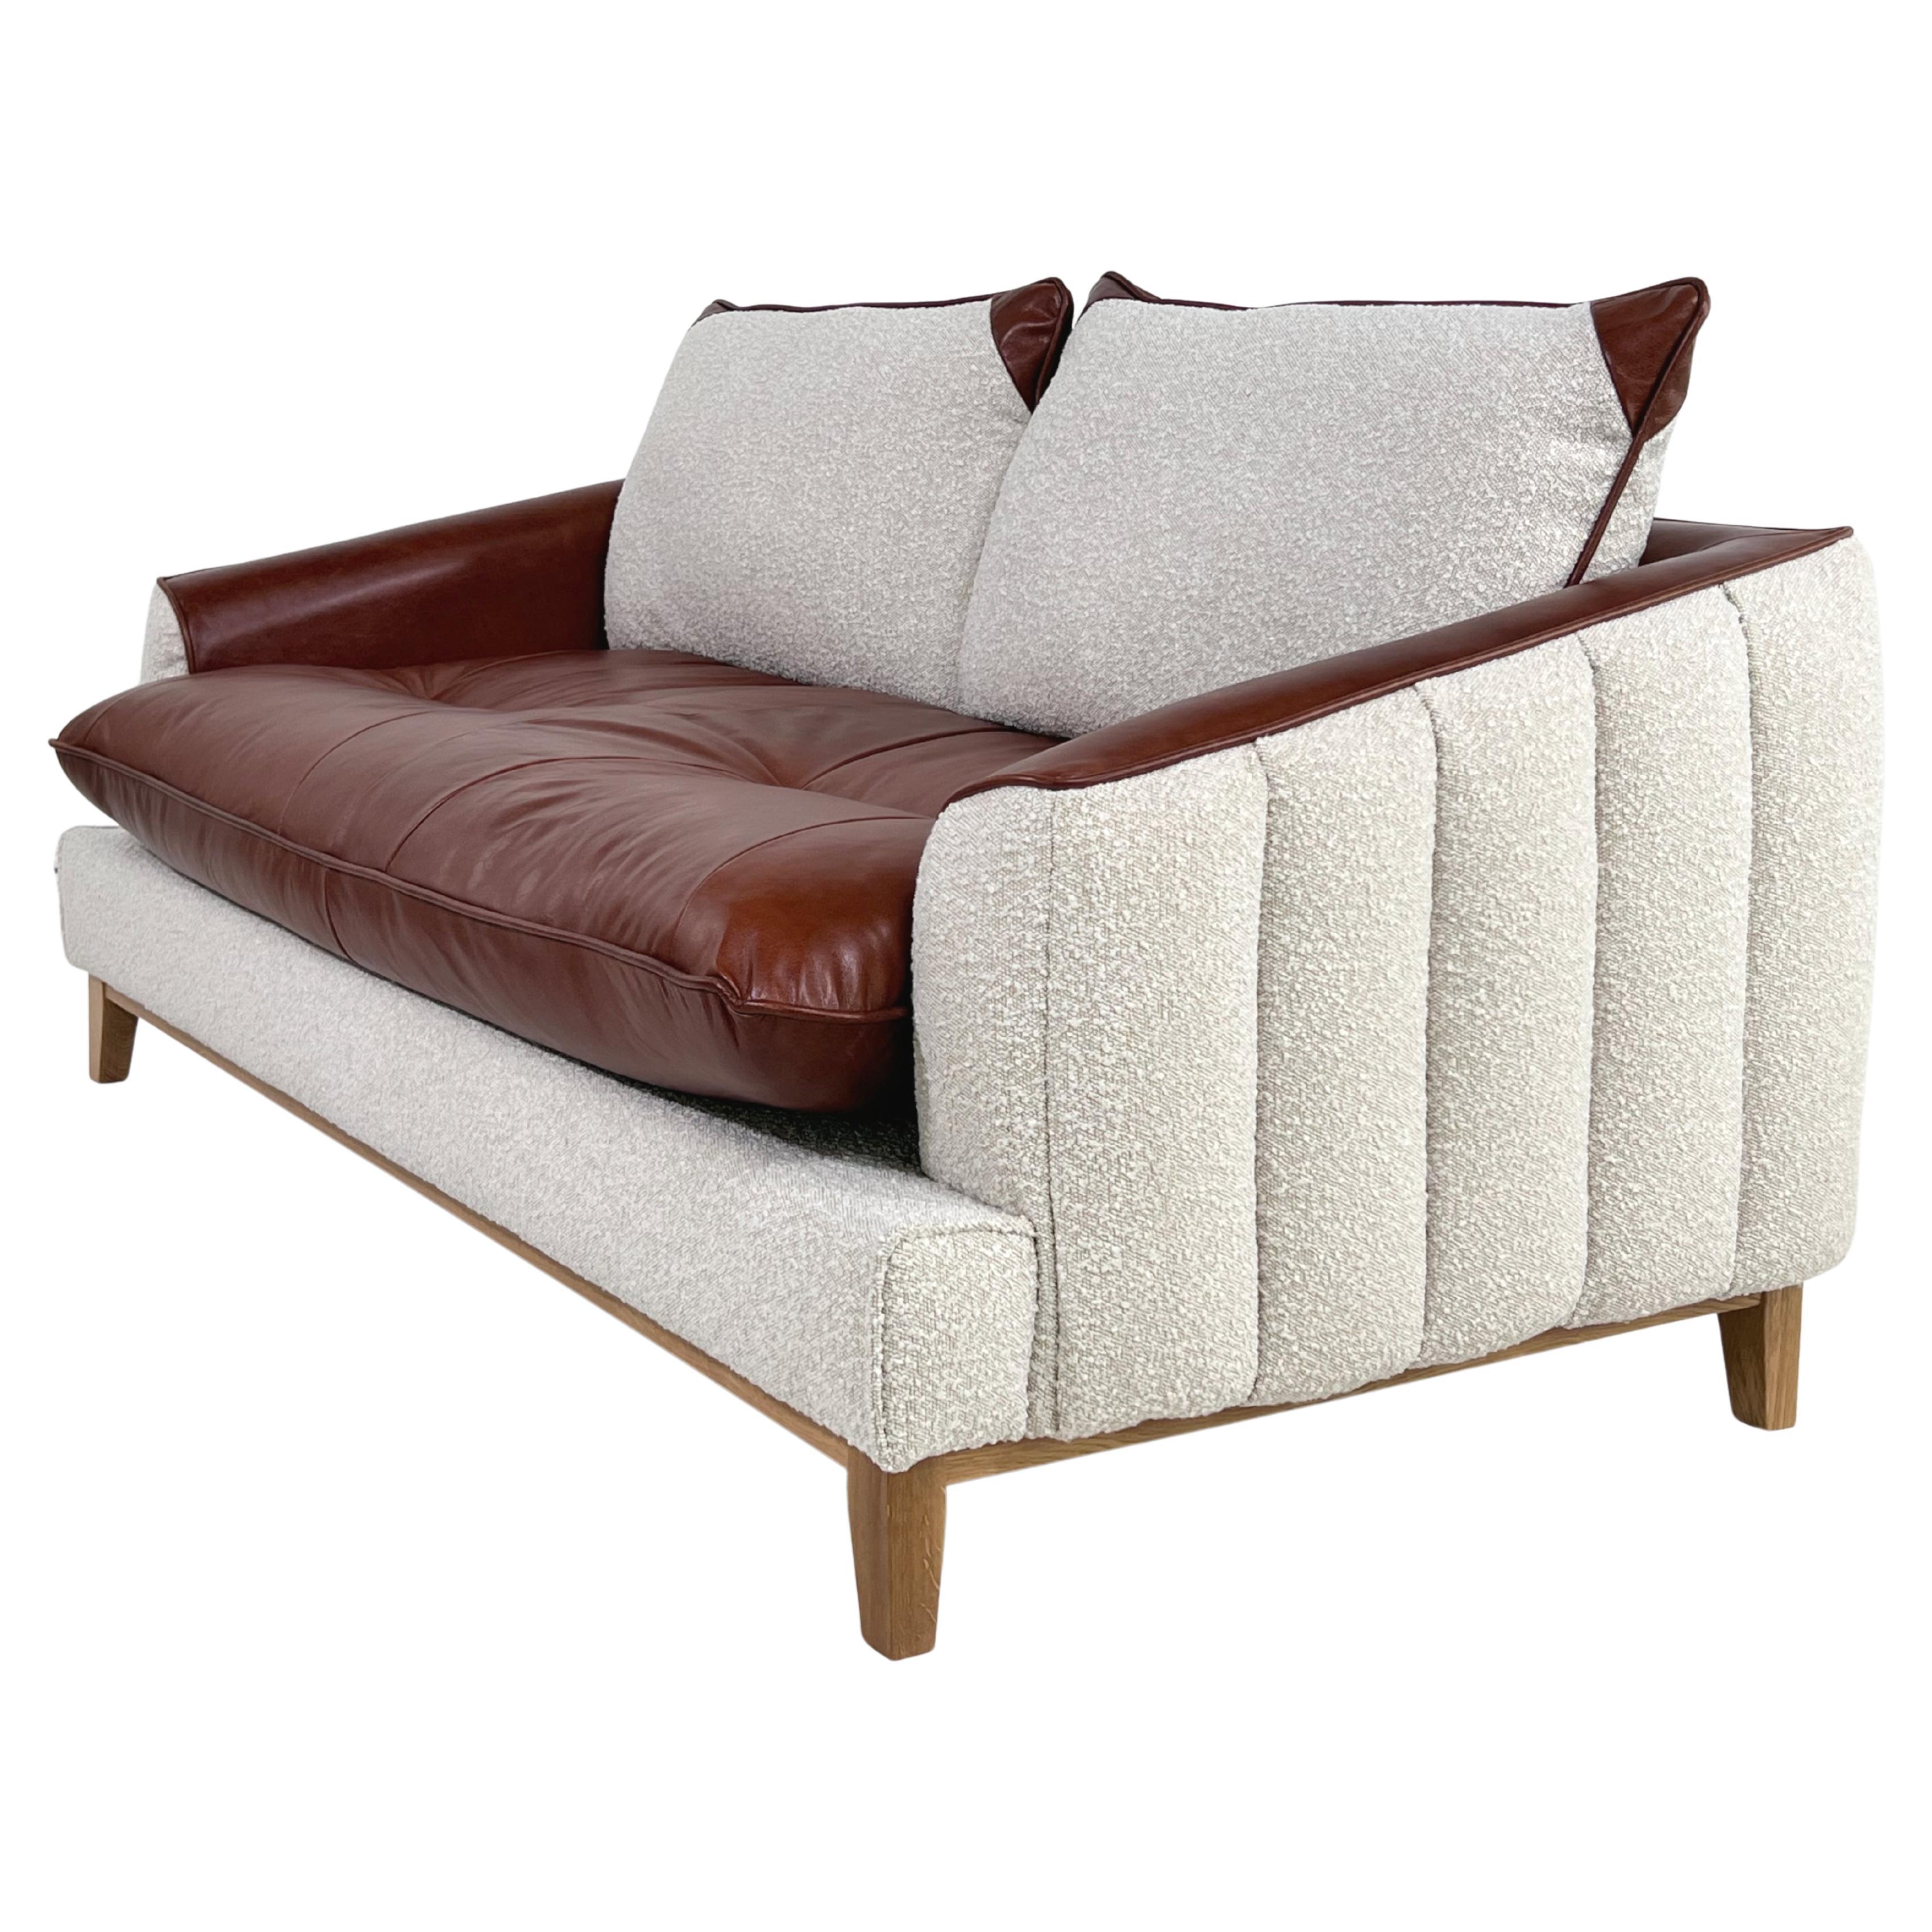 Mcm and Scandinavian Design Style Cognac Leather and Beige Bouclé Fabric Sofa For Sale